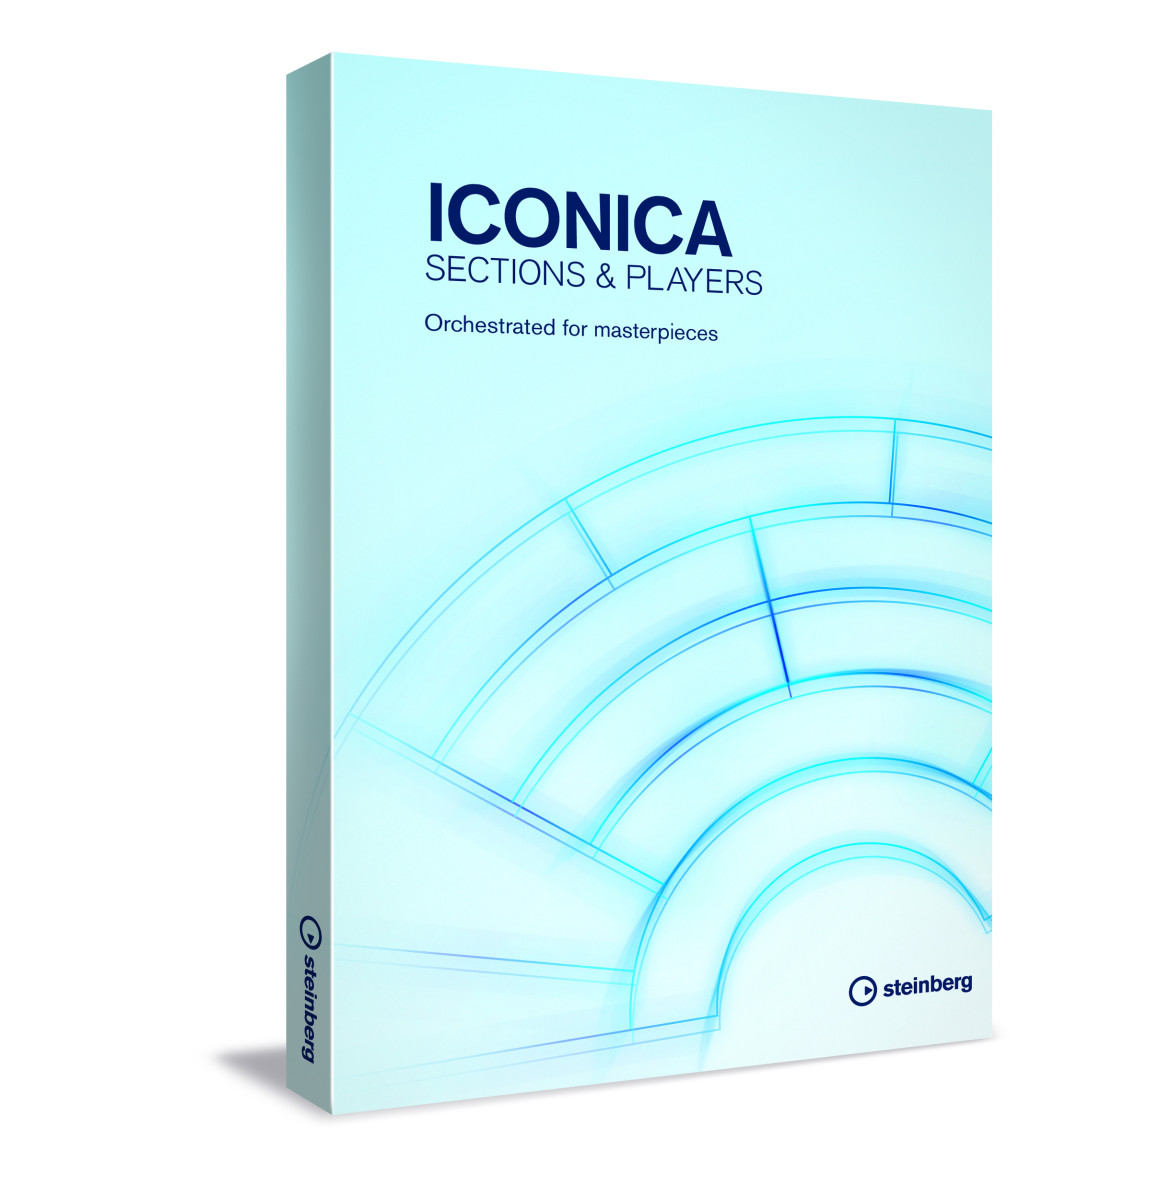 Iconica Sections & Players